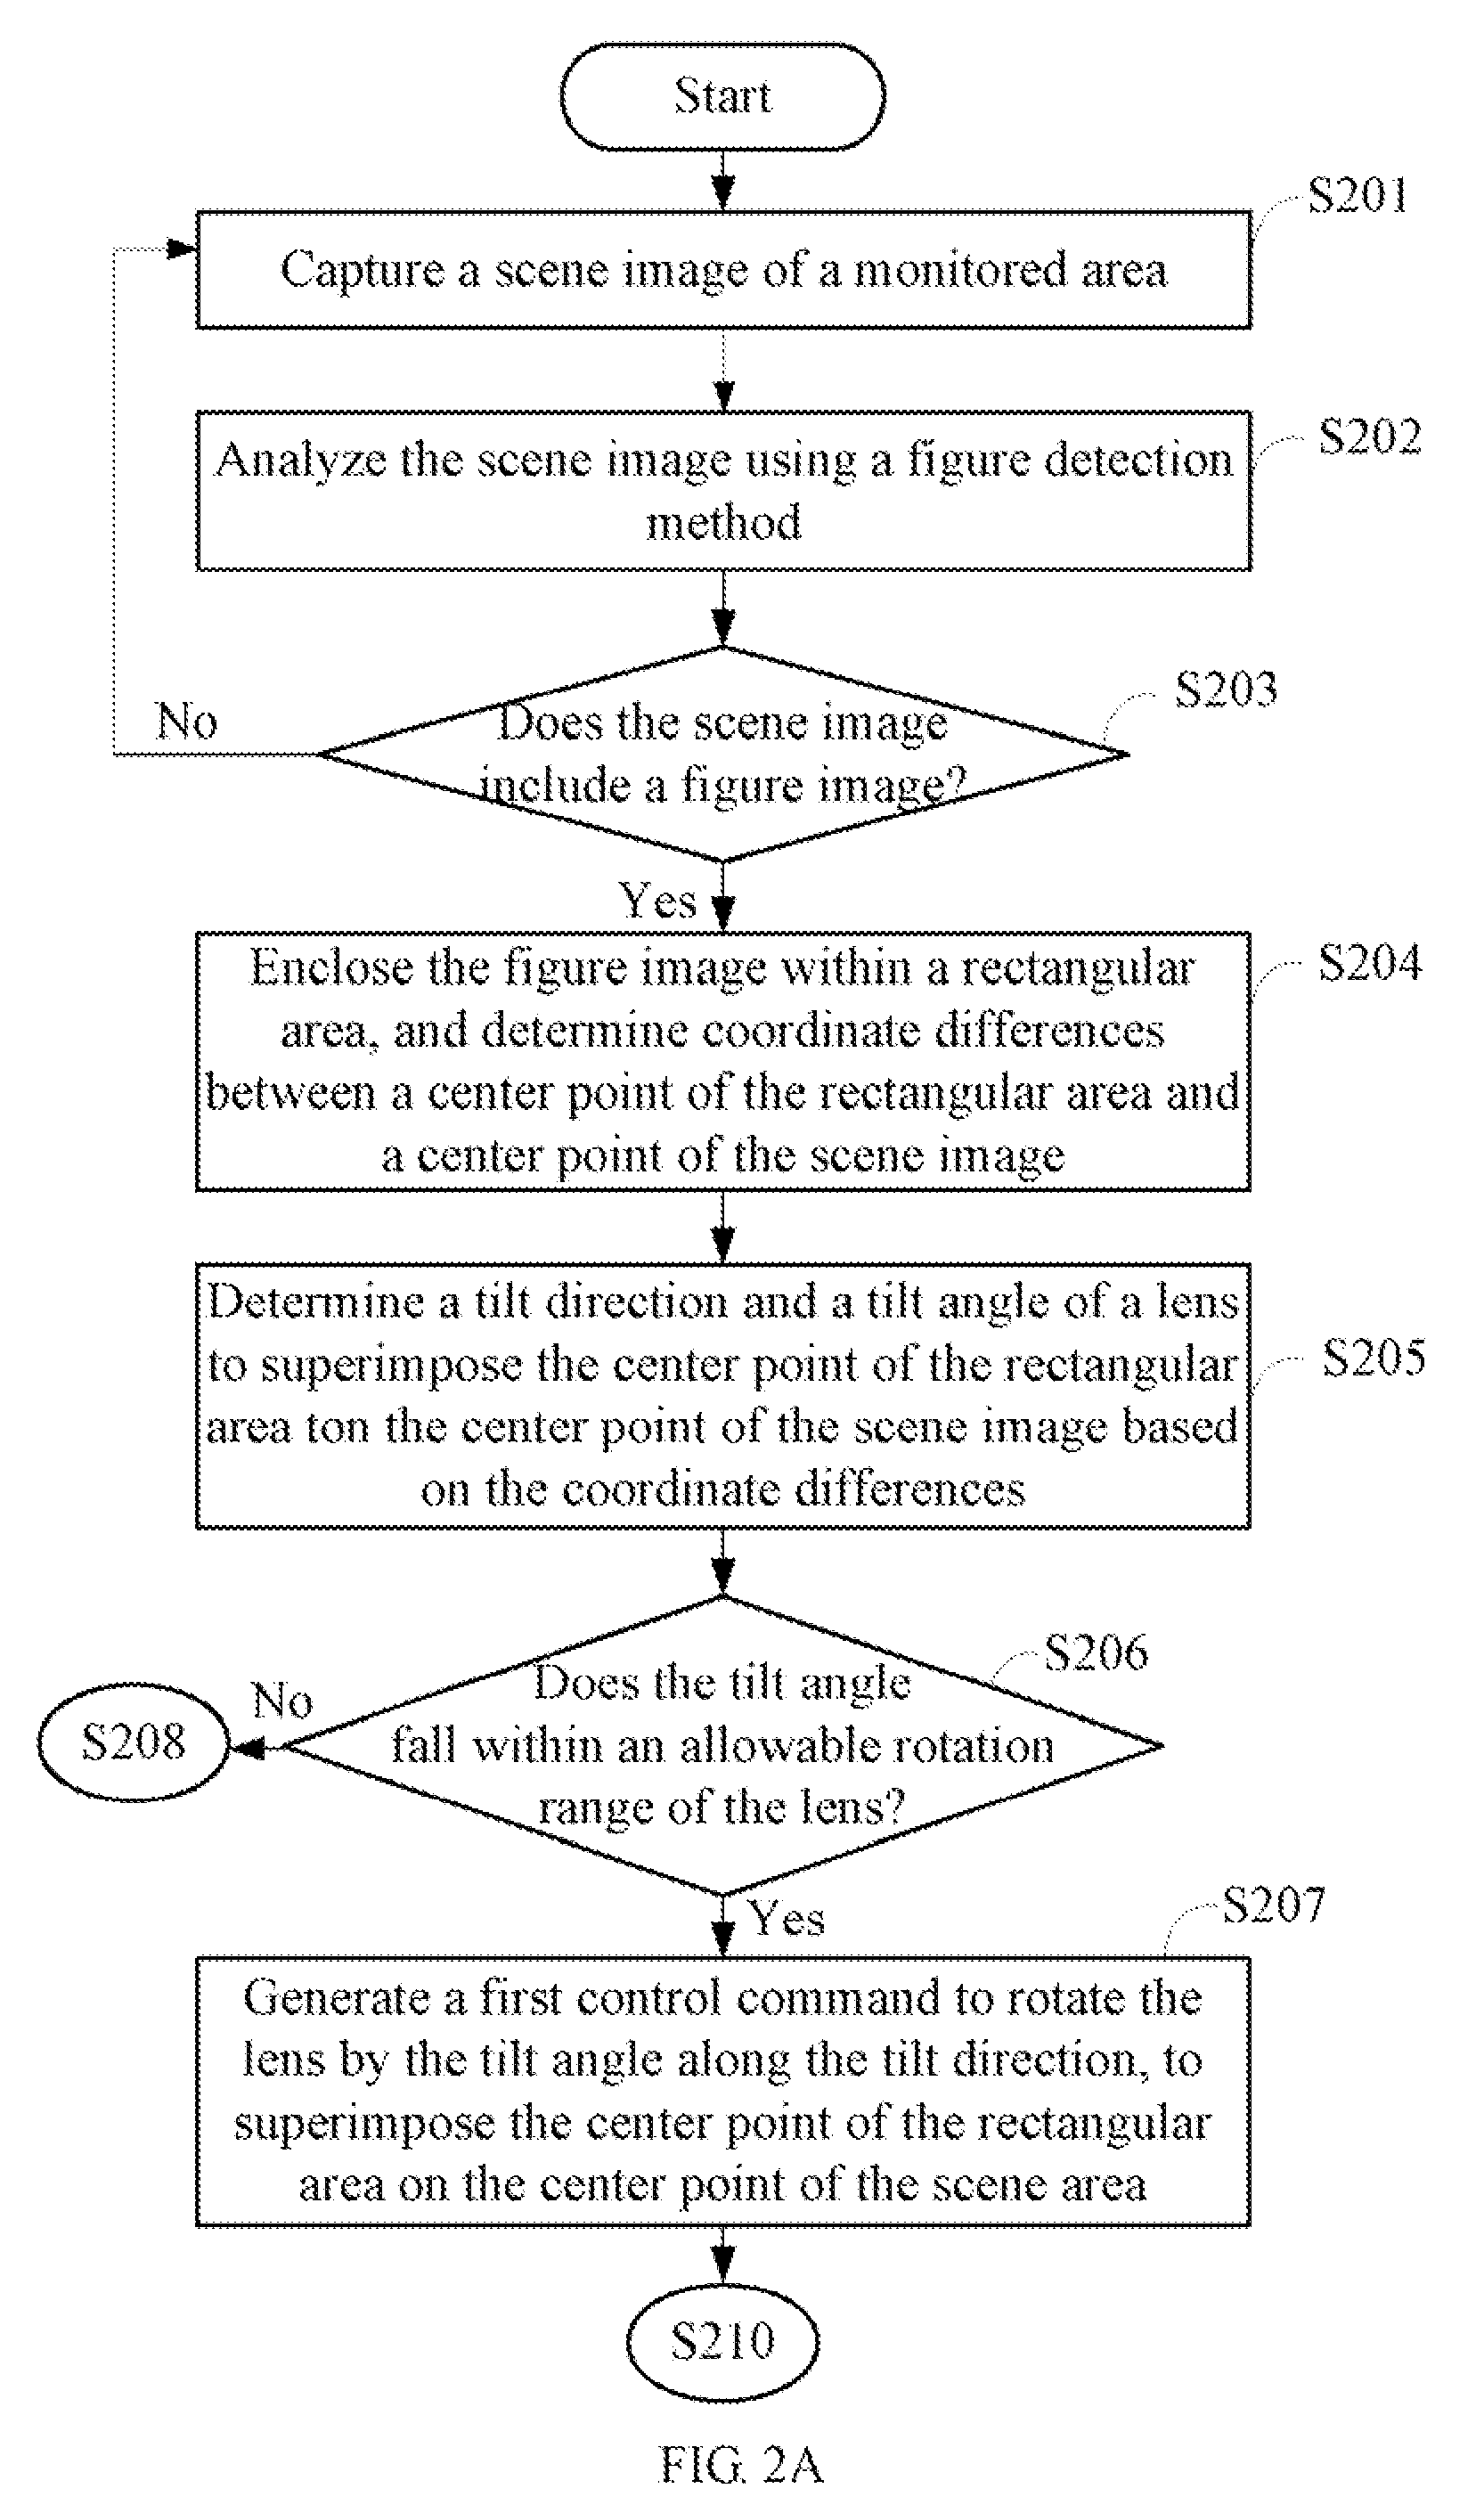 System and method for controlling unmanned aerial vehicle